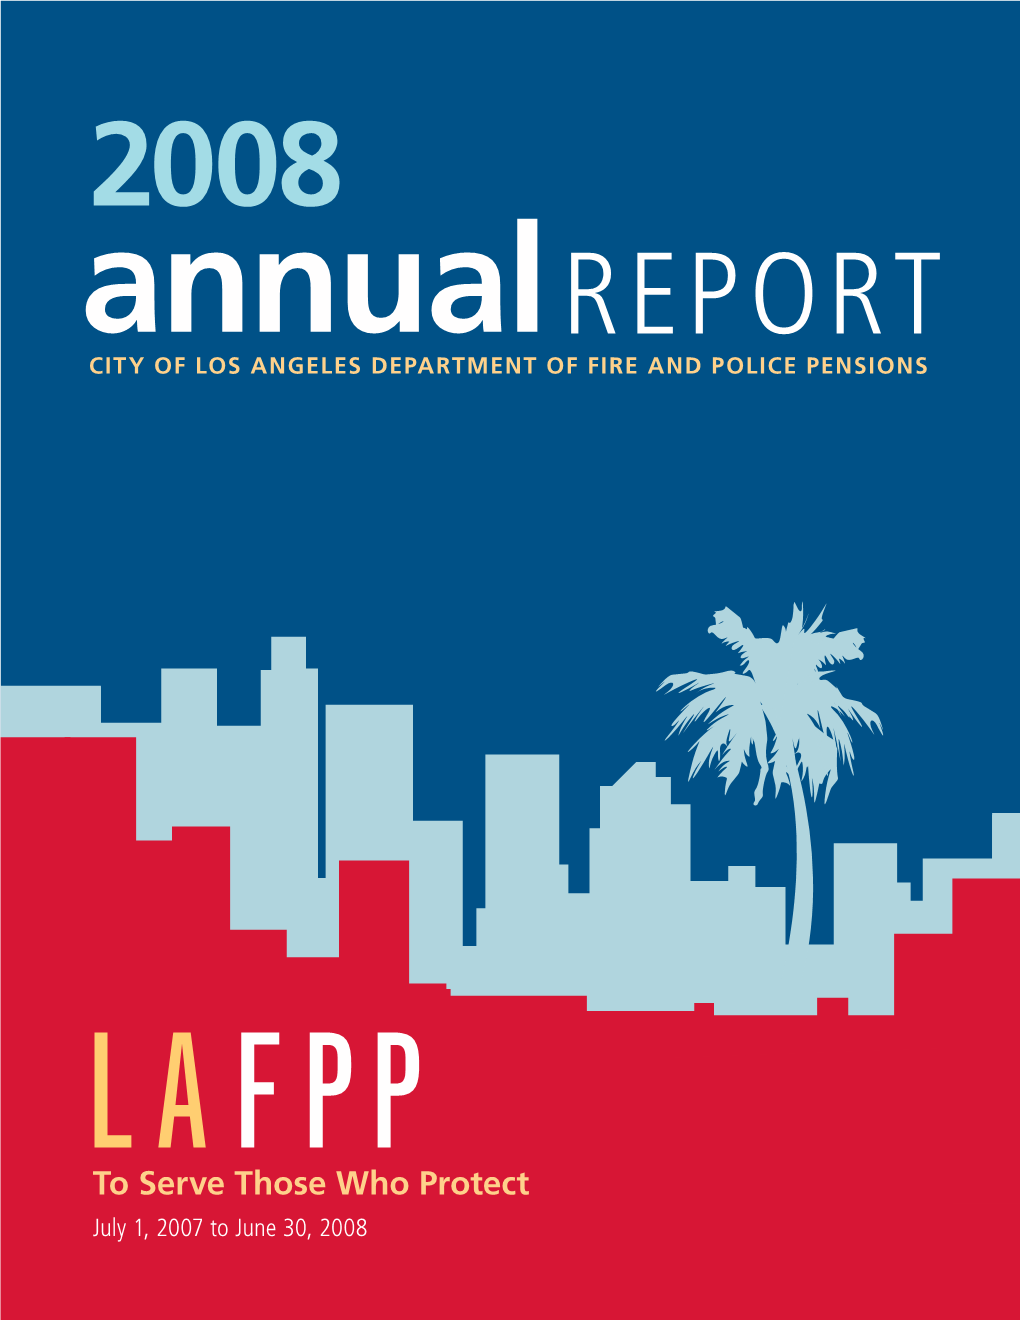 2008 Annual REPORT July 1, 2007 to June 30, 2008